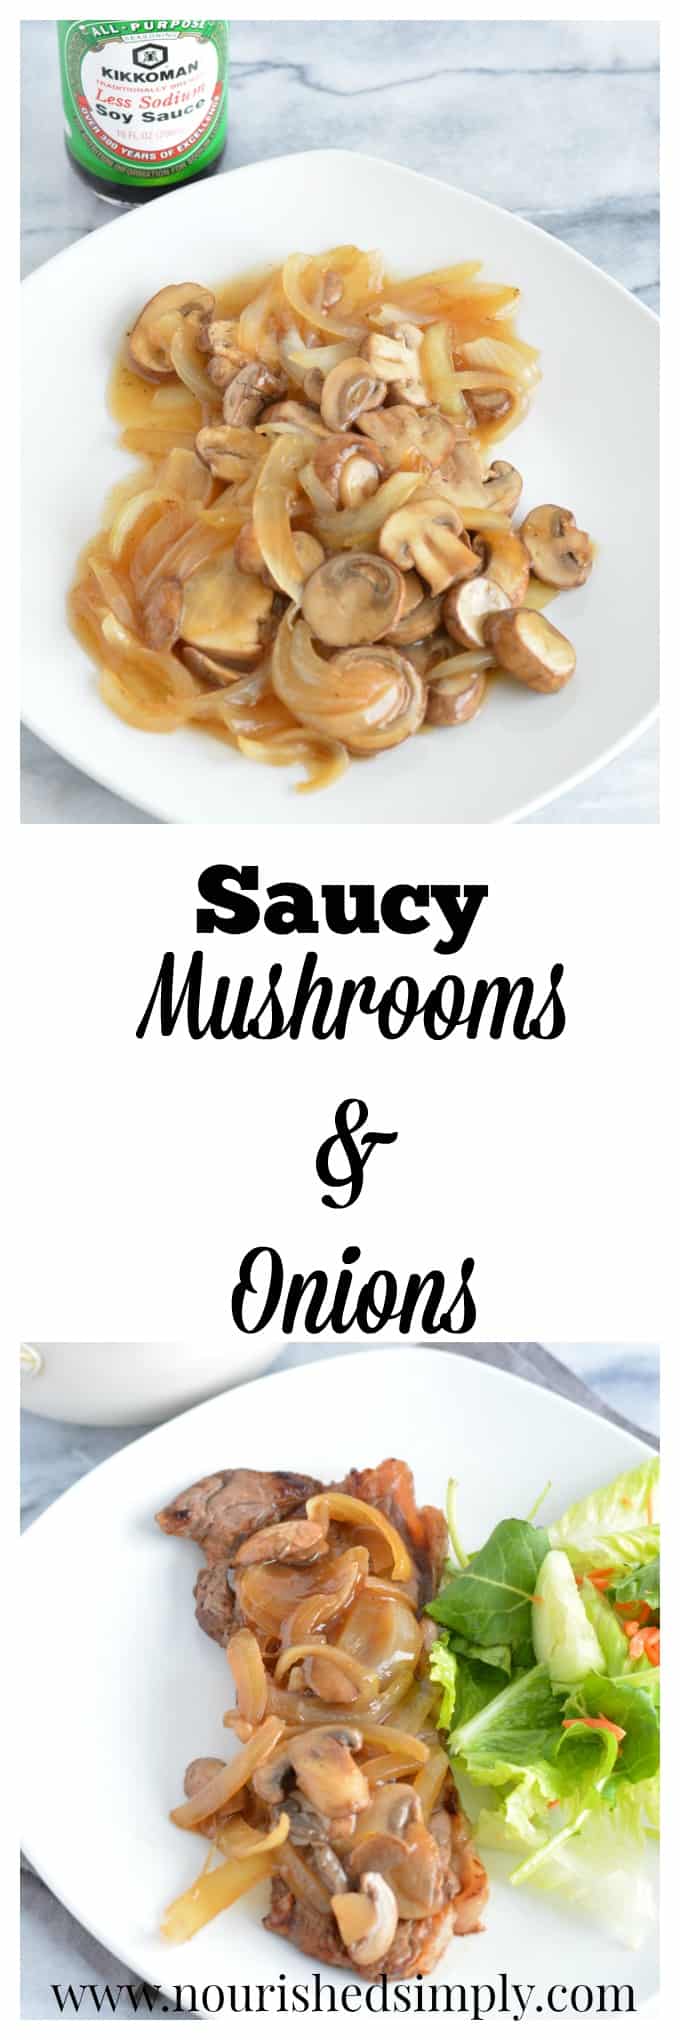 Top over your steak or beef entree with these meaty saucy mushrooms and onions.